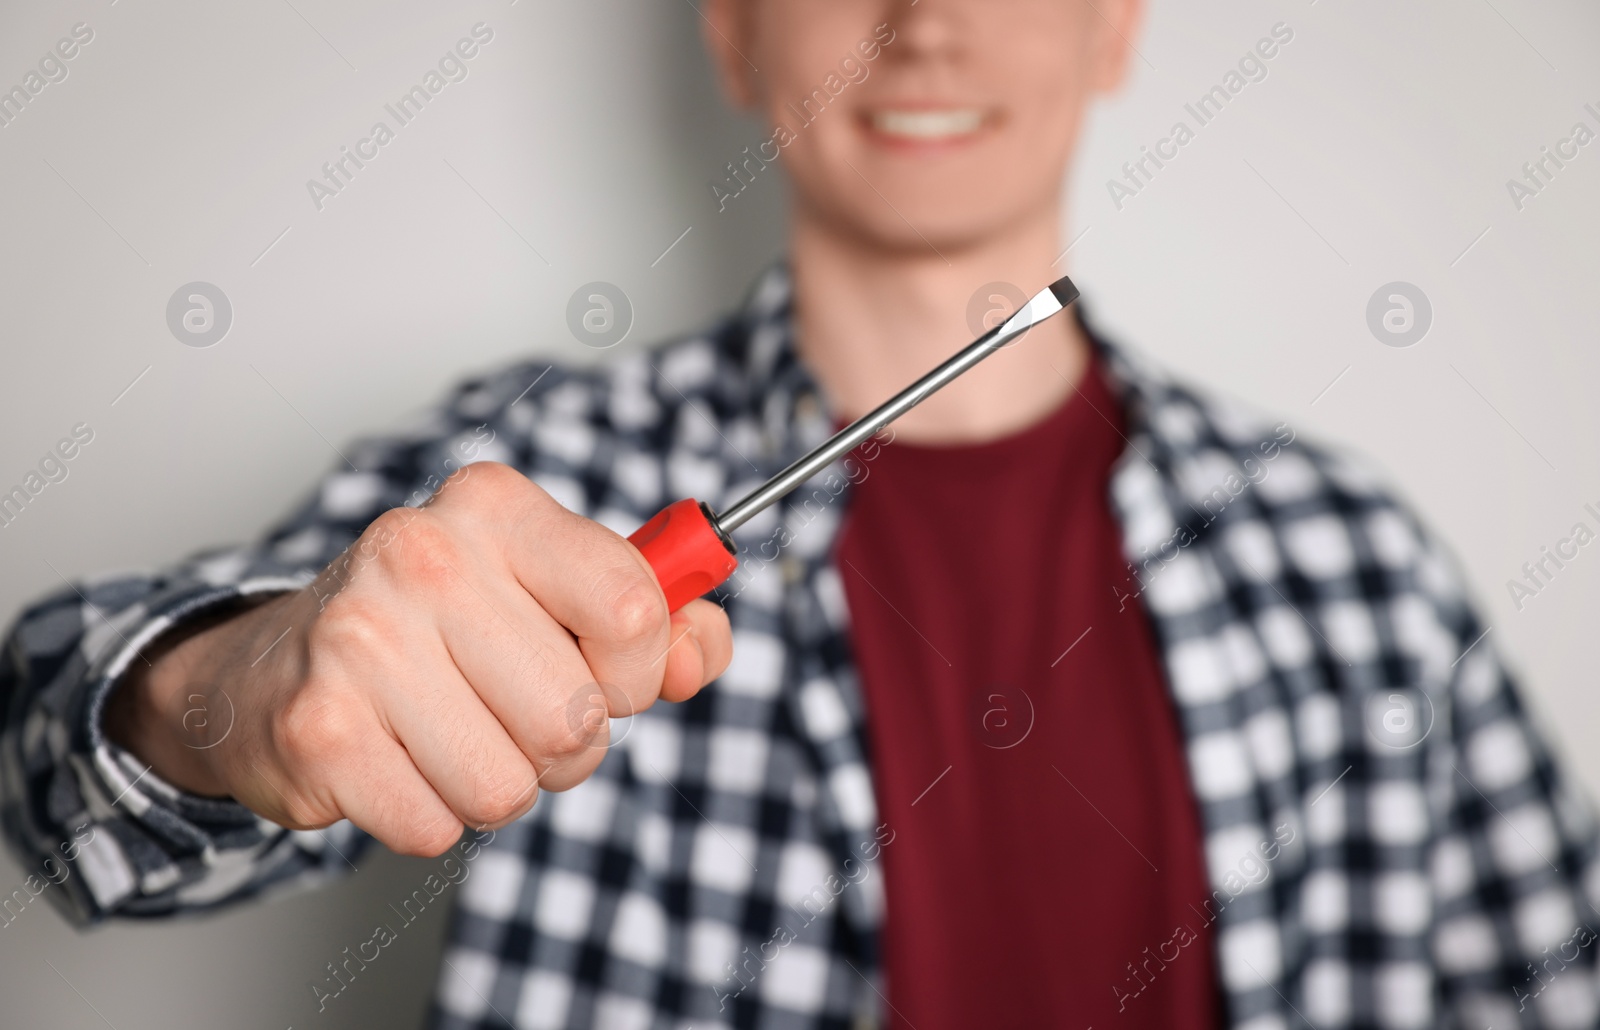 Photo of Handyman with screwdriver against light background, focus on hand